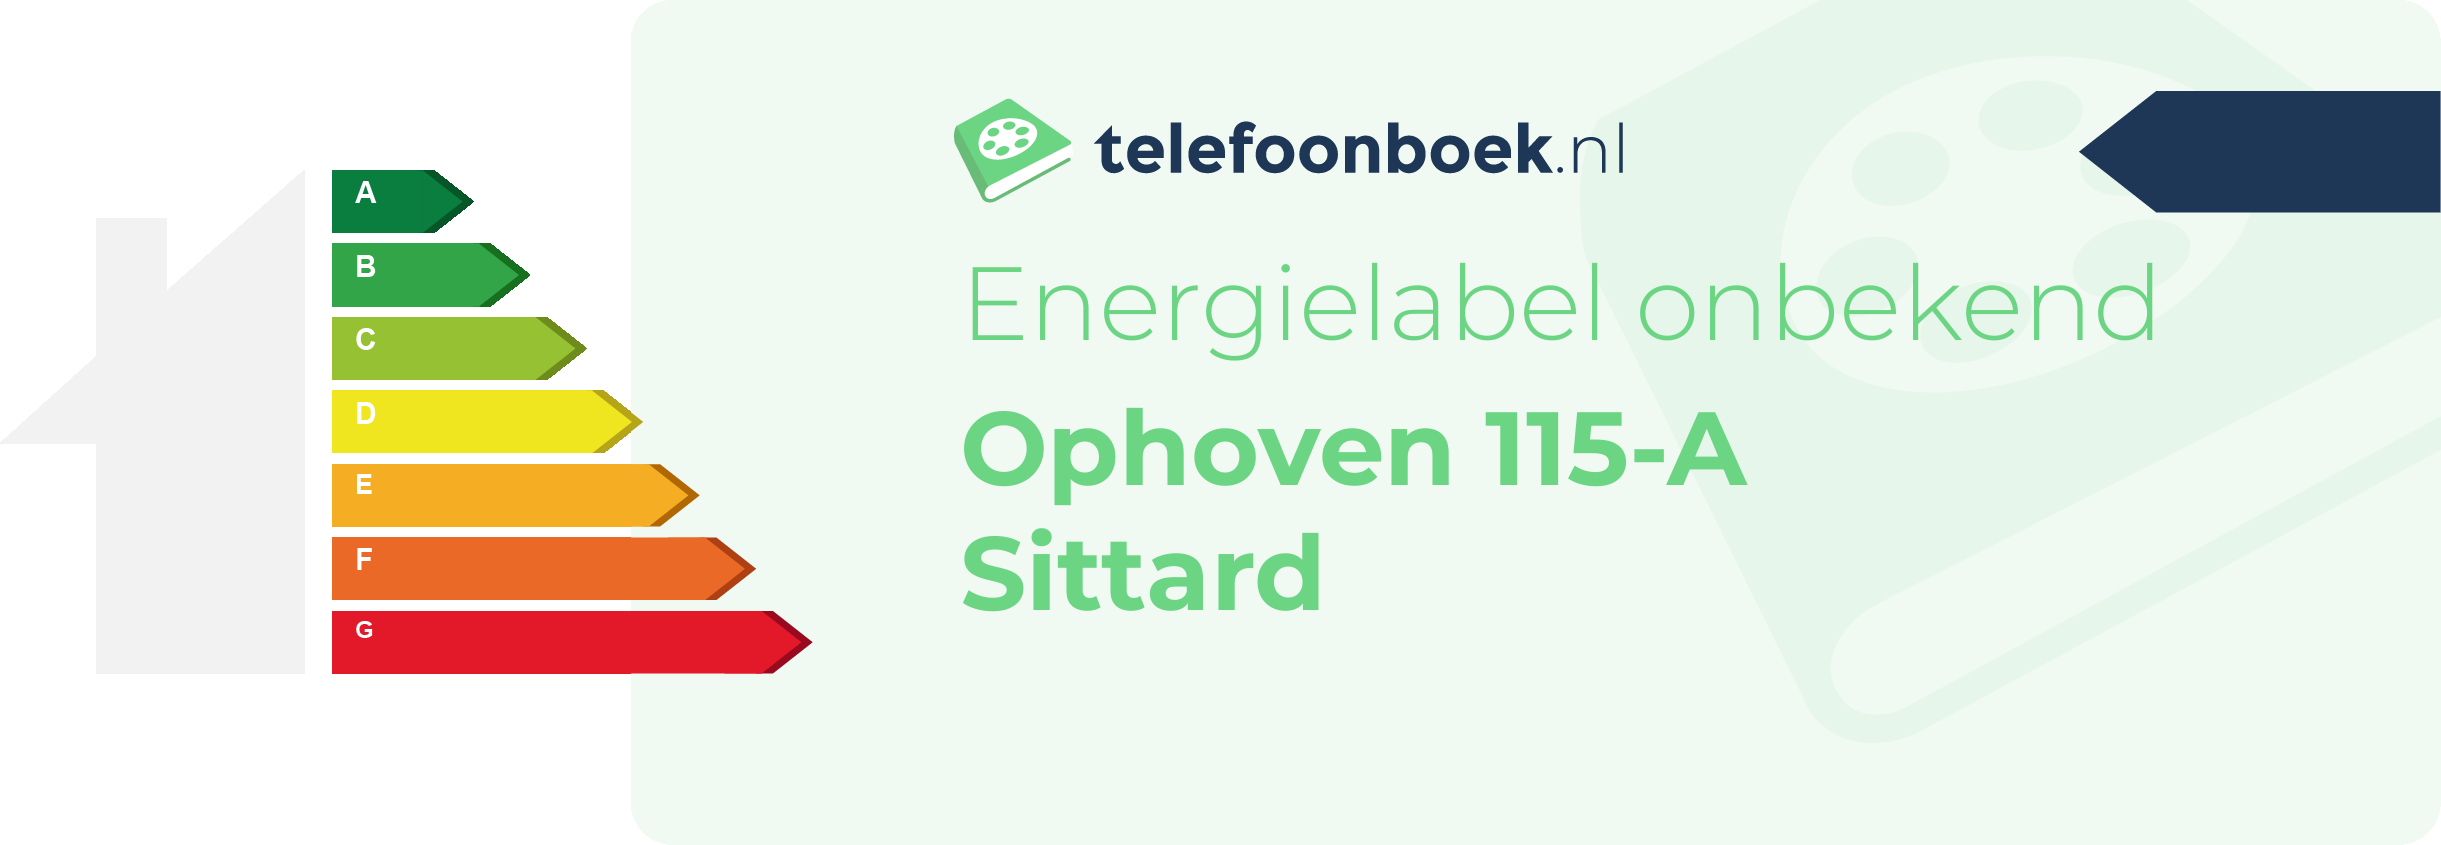 Energielabel Ophoven 115-A Sittard